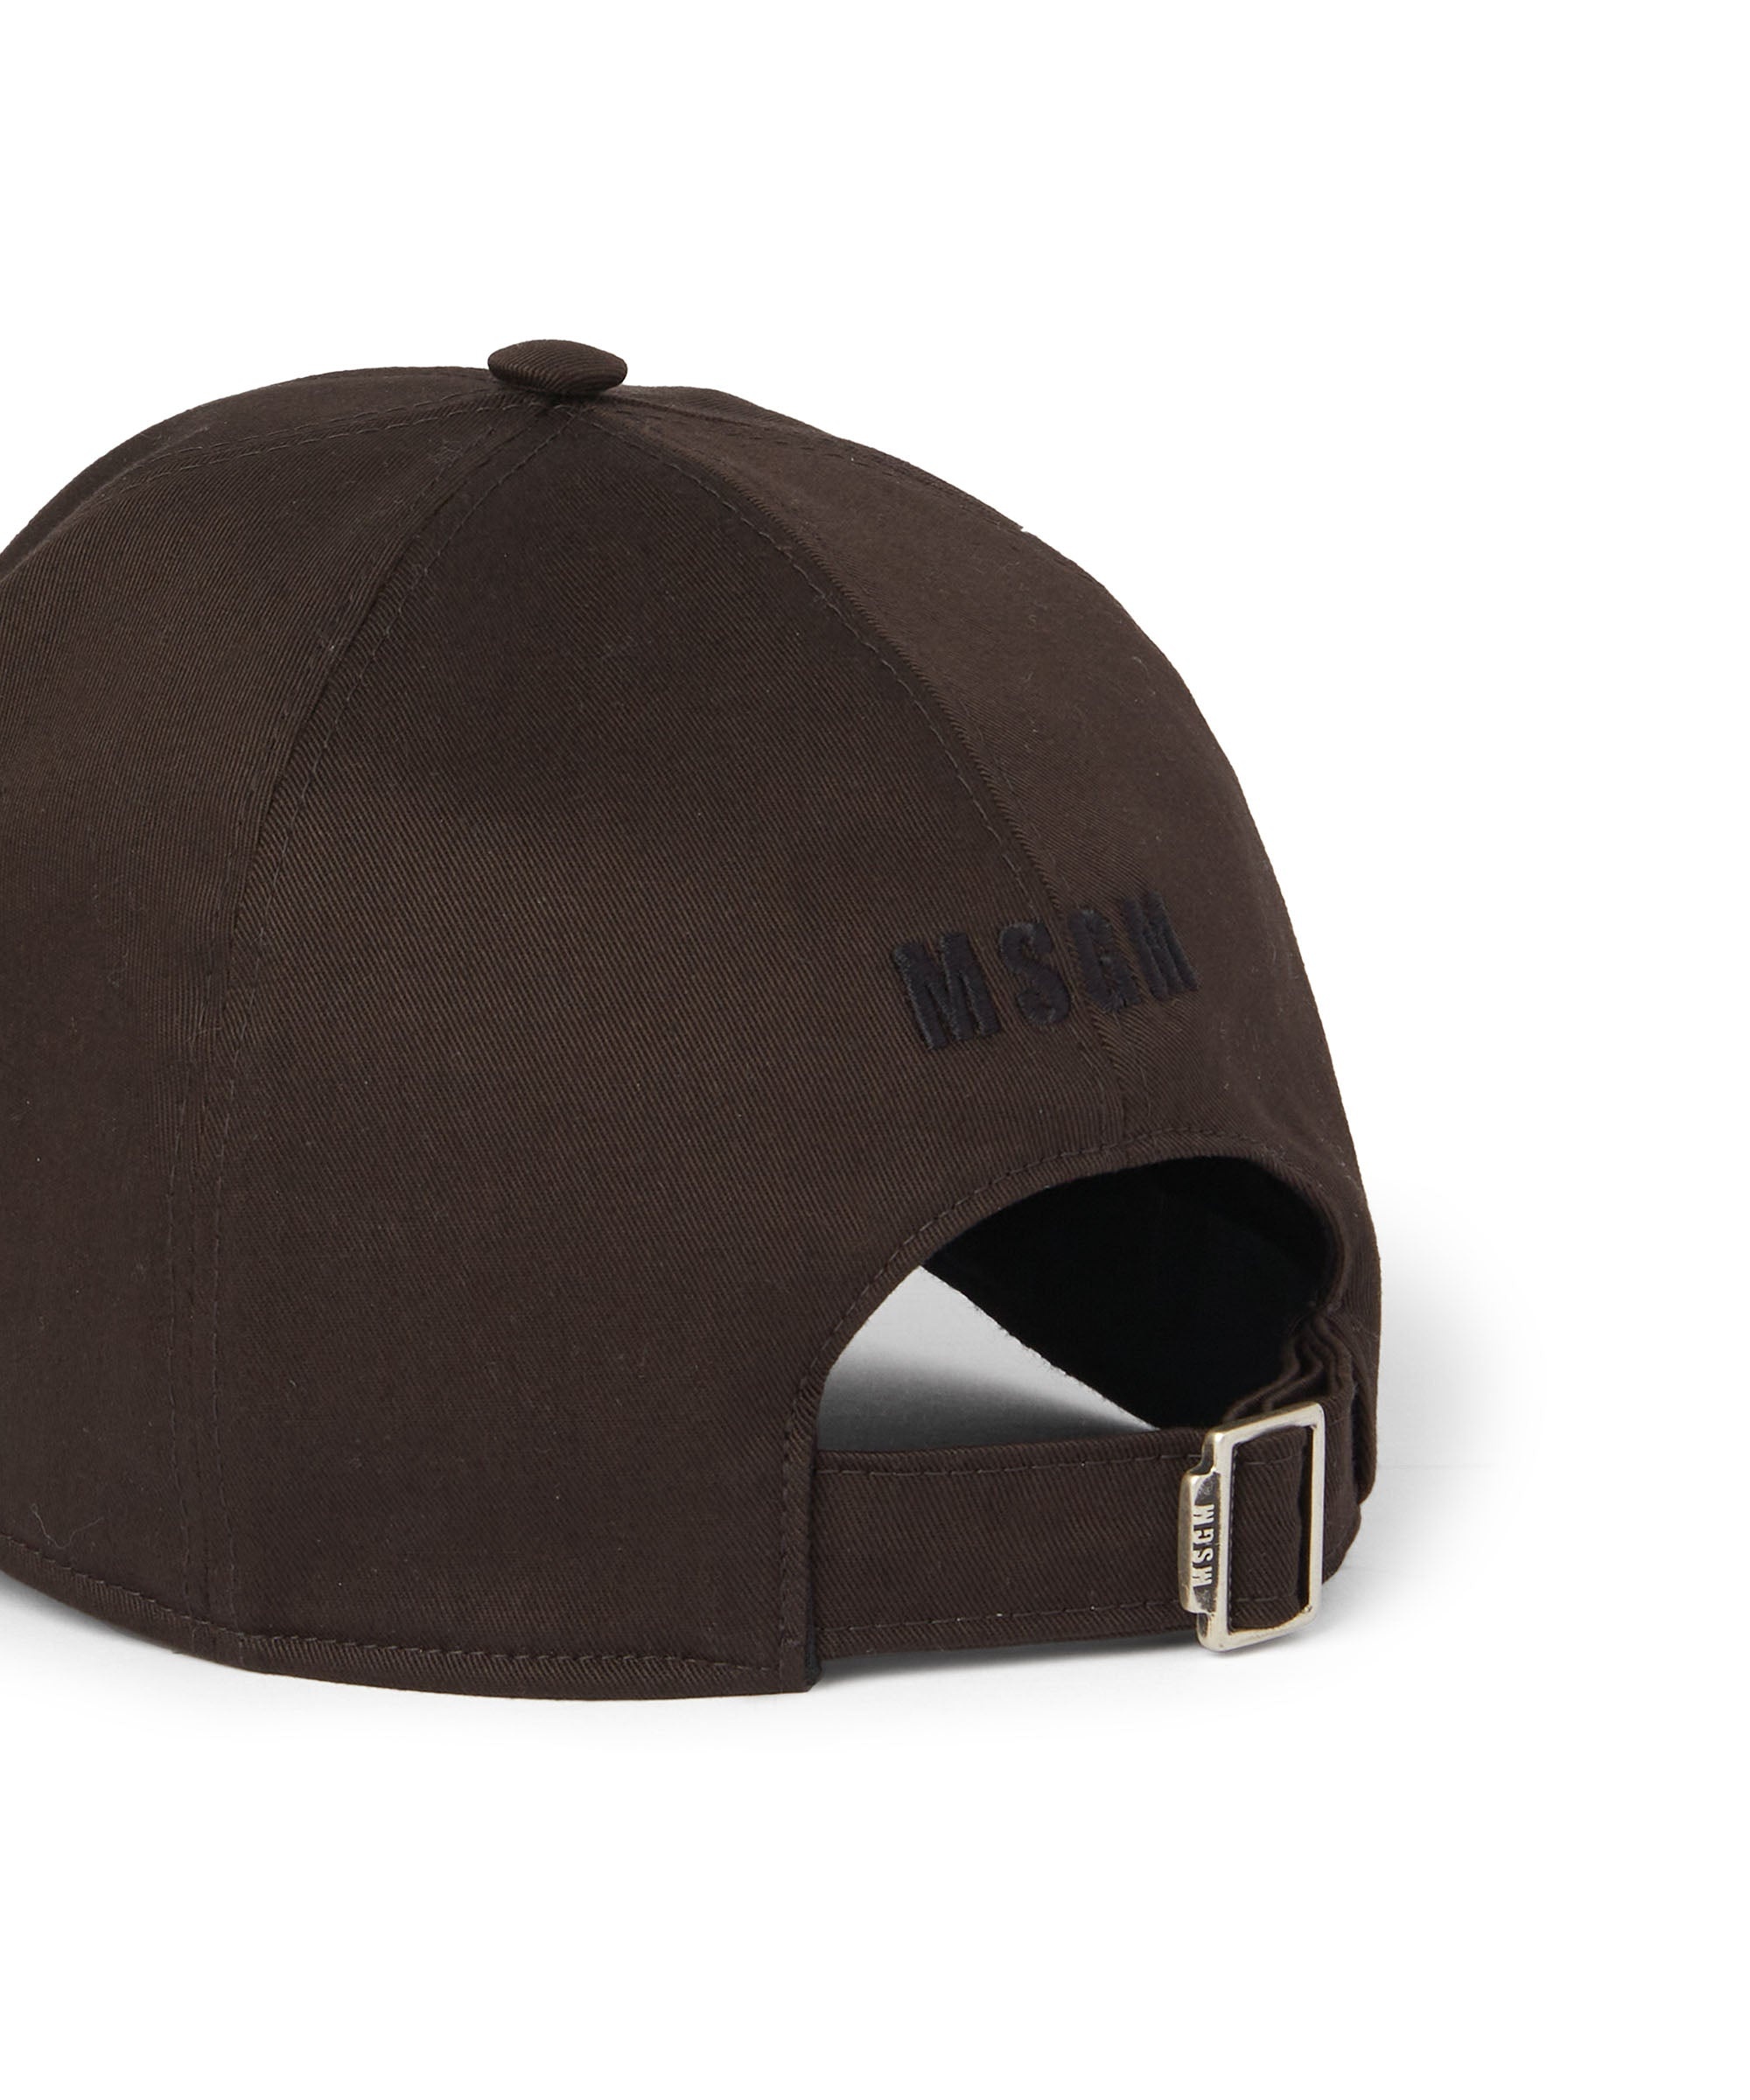 Baseball cap with embroidered  "duro" - 2